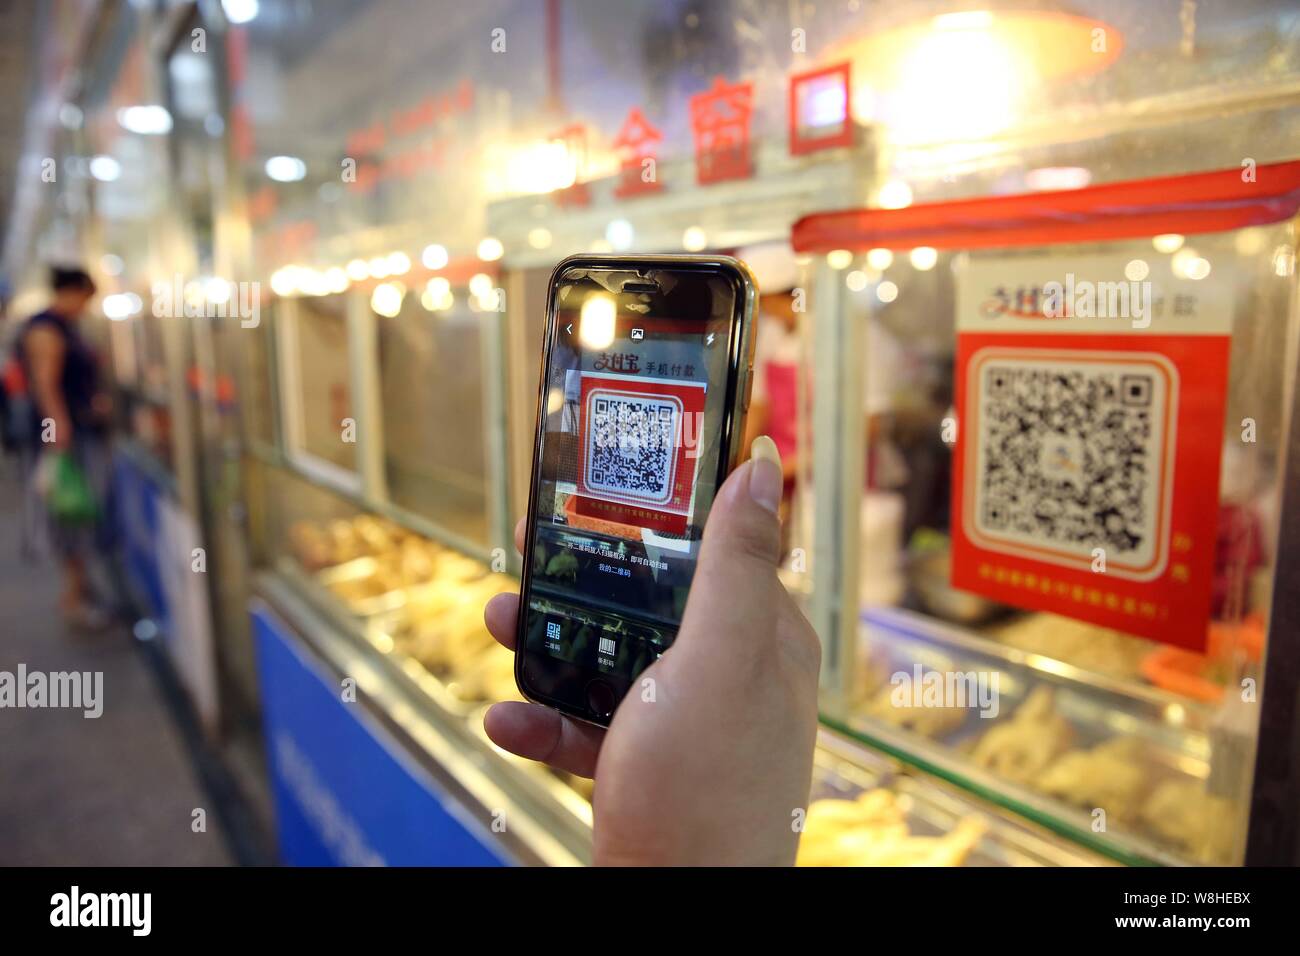 A Chinese customer scans a QR code via mobile payment service Alipay of Alibaba Group on her smartphone to pay for her purchase at a free market in We Stock Photo